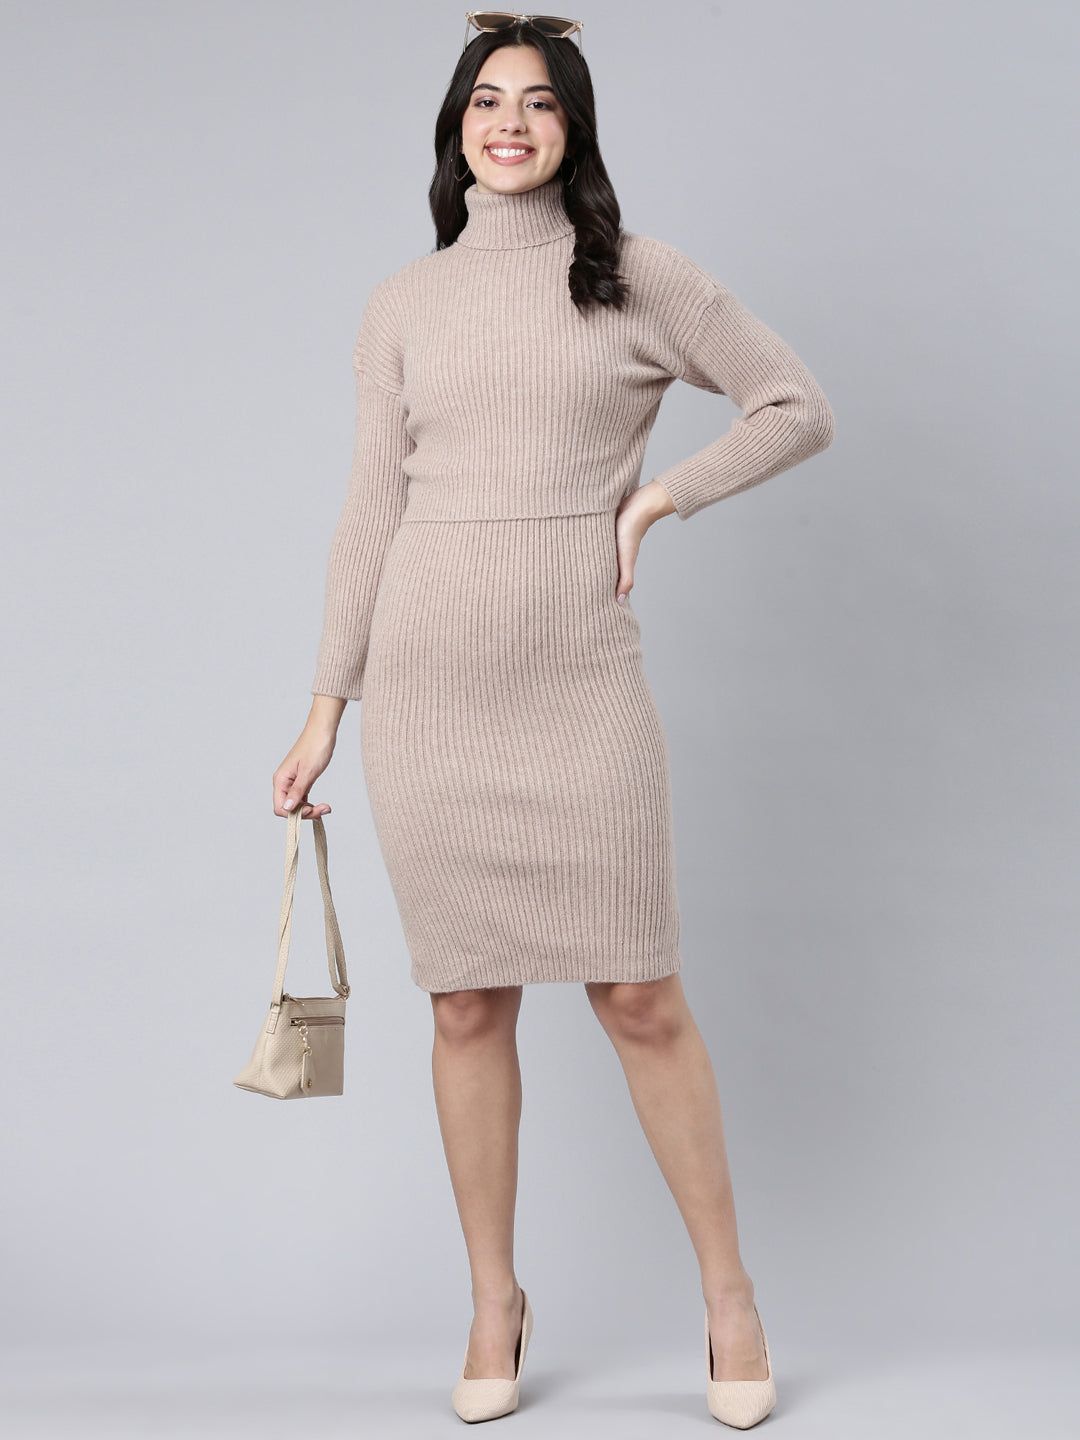 Women Self Design Beige Bodycon Dress Comes with Top